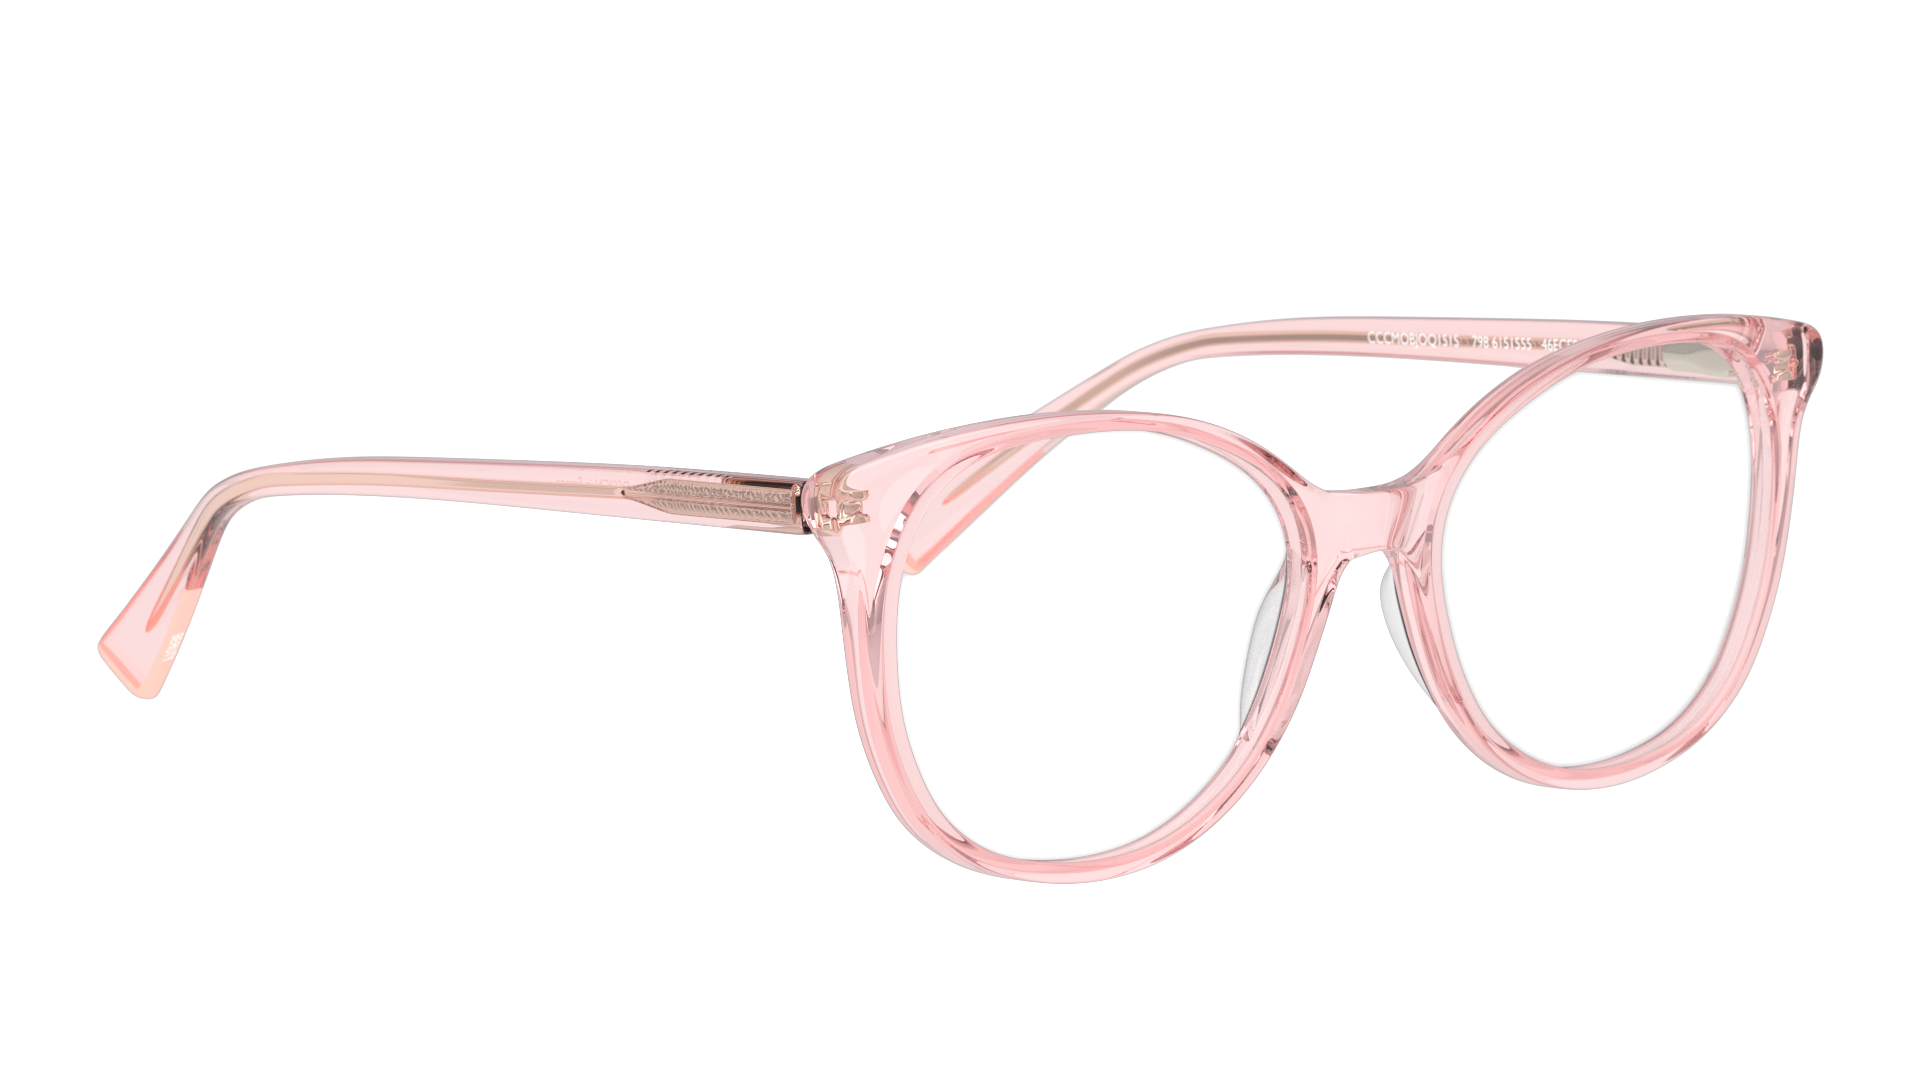 Angle_Right01 Unofficial UNOF0002 (PX00) Glasses Transparent / Pink